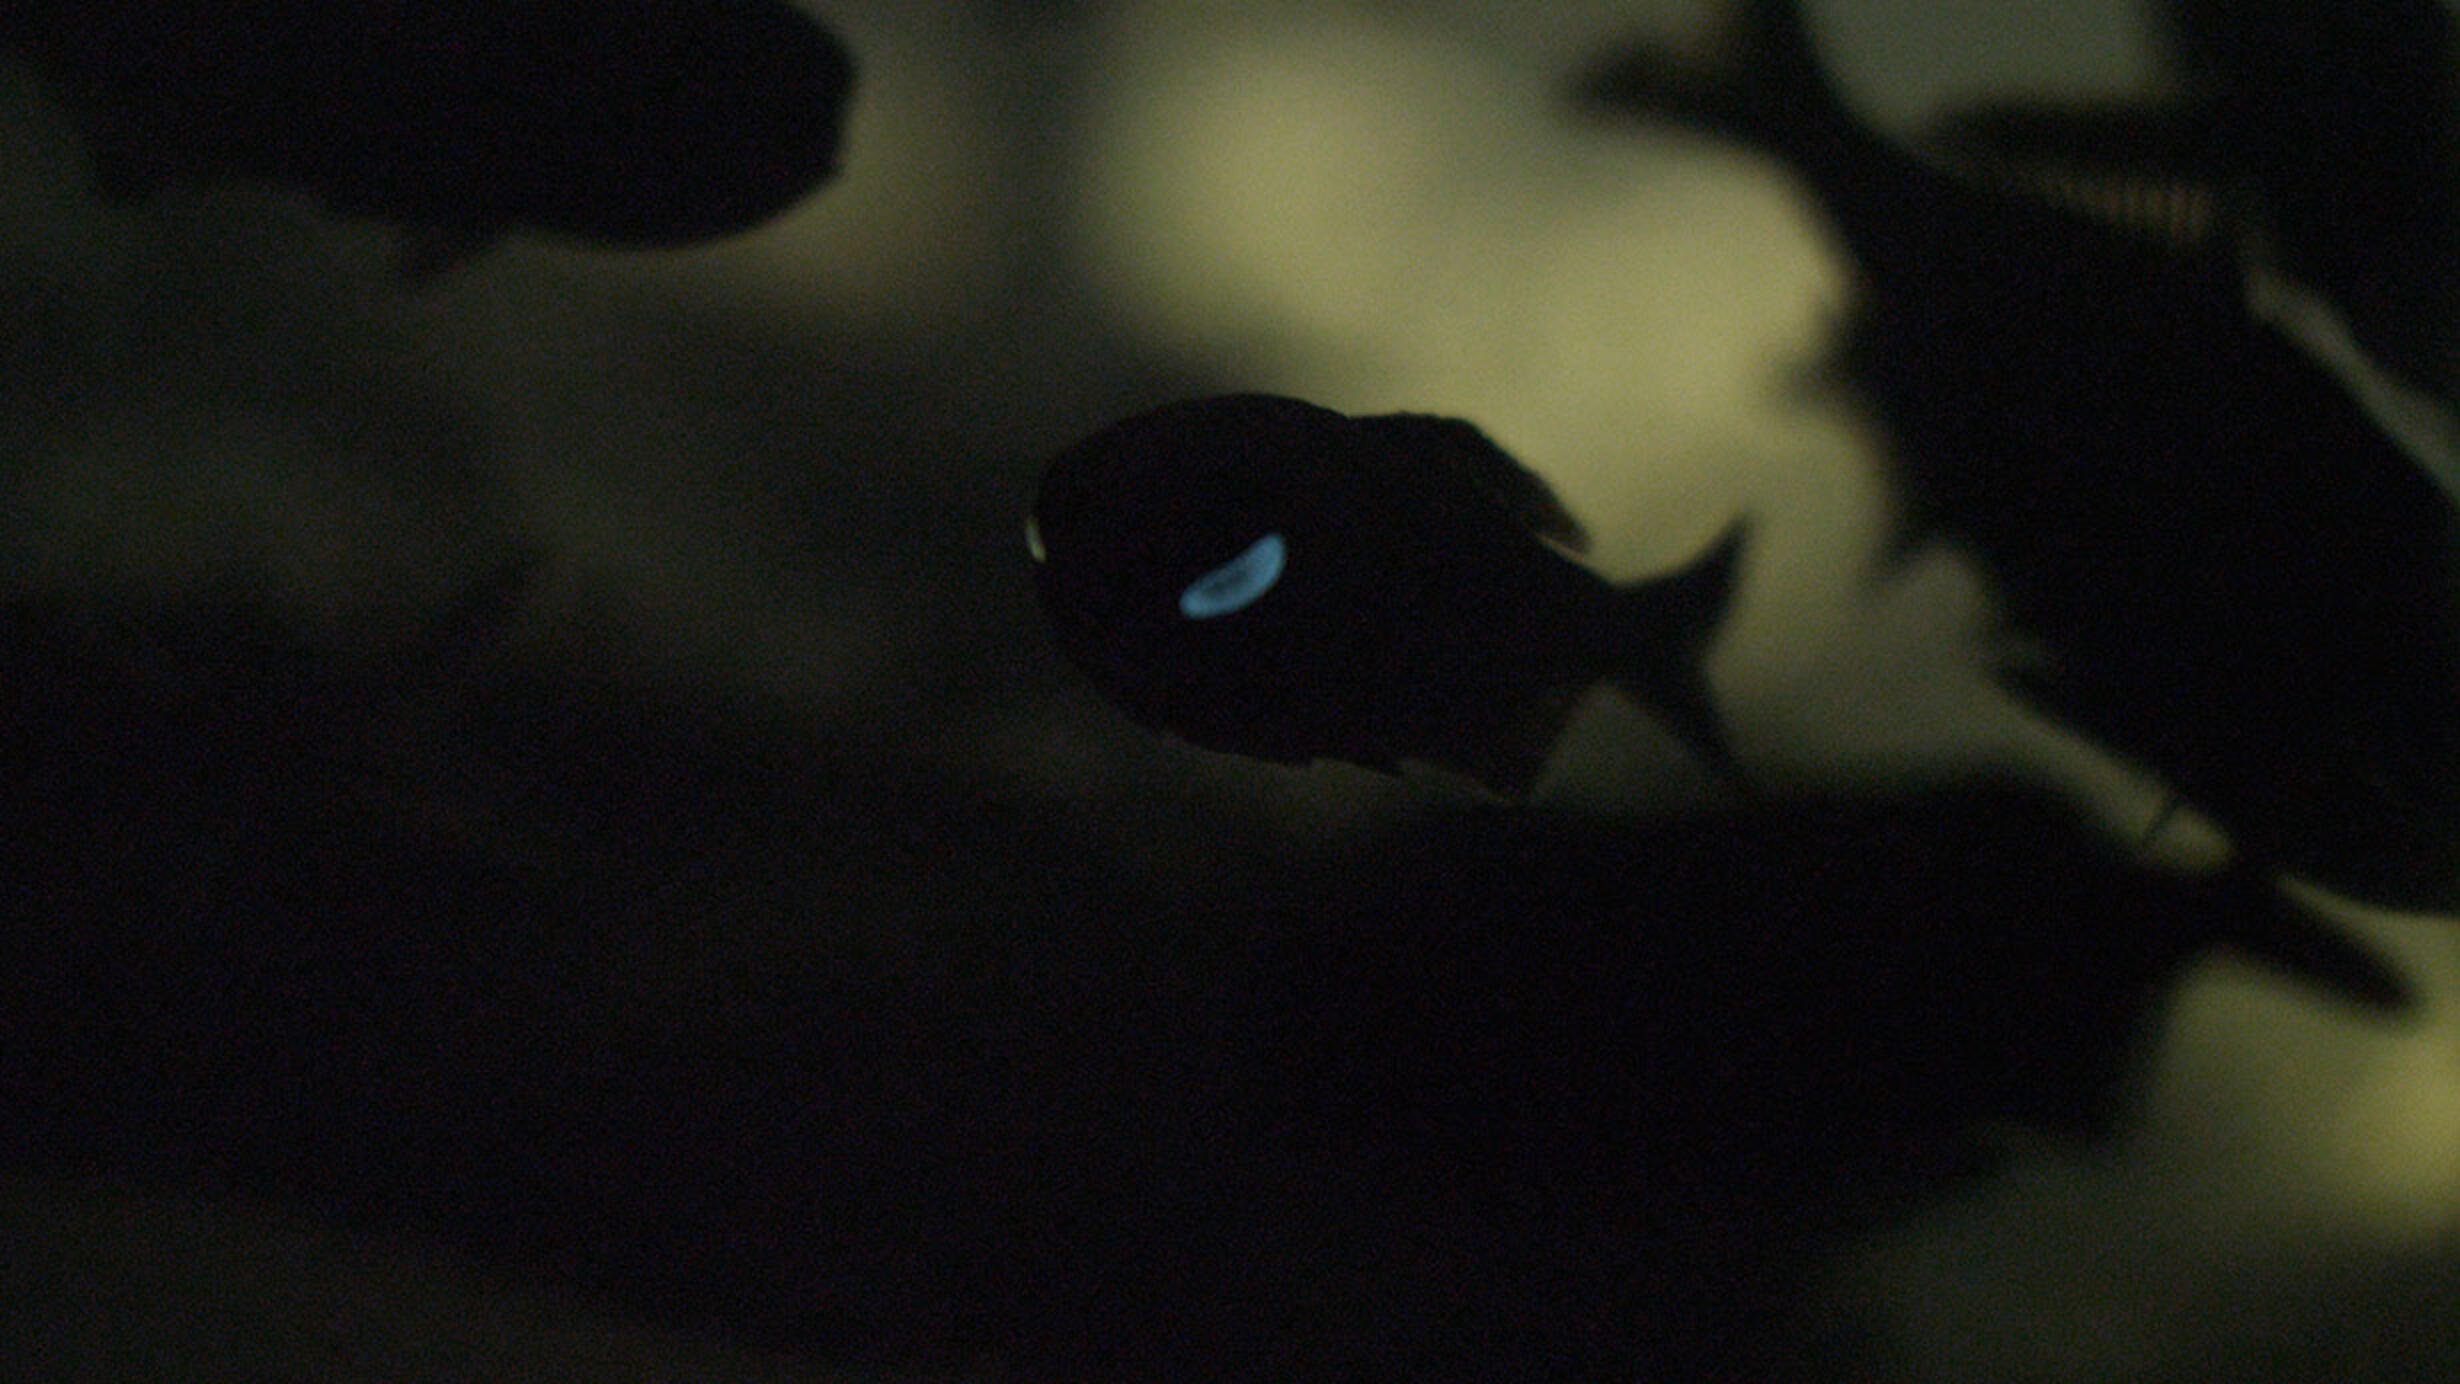 Glowing organs below the eyes are visible in school of fish swimming in murky waters.